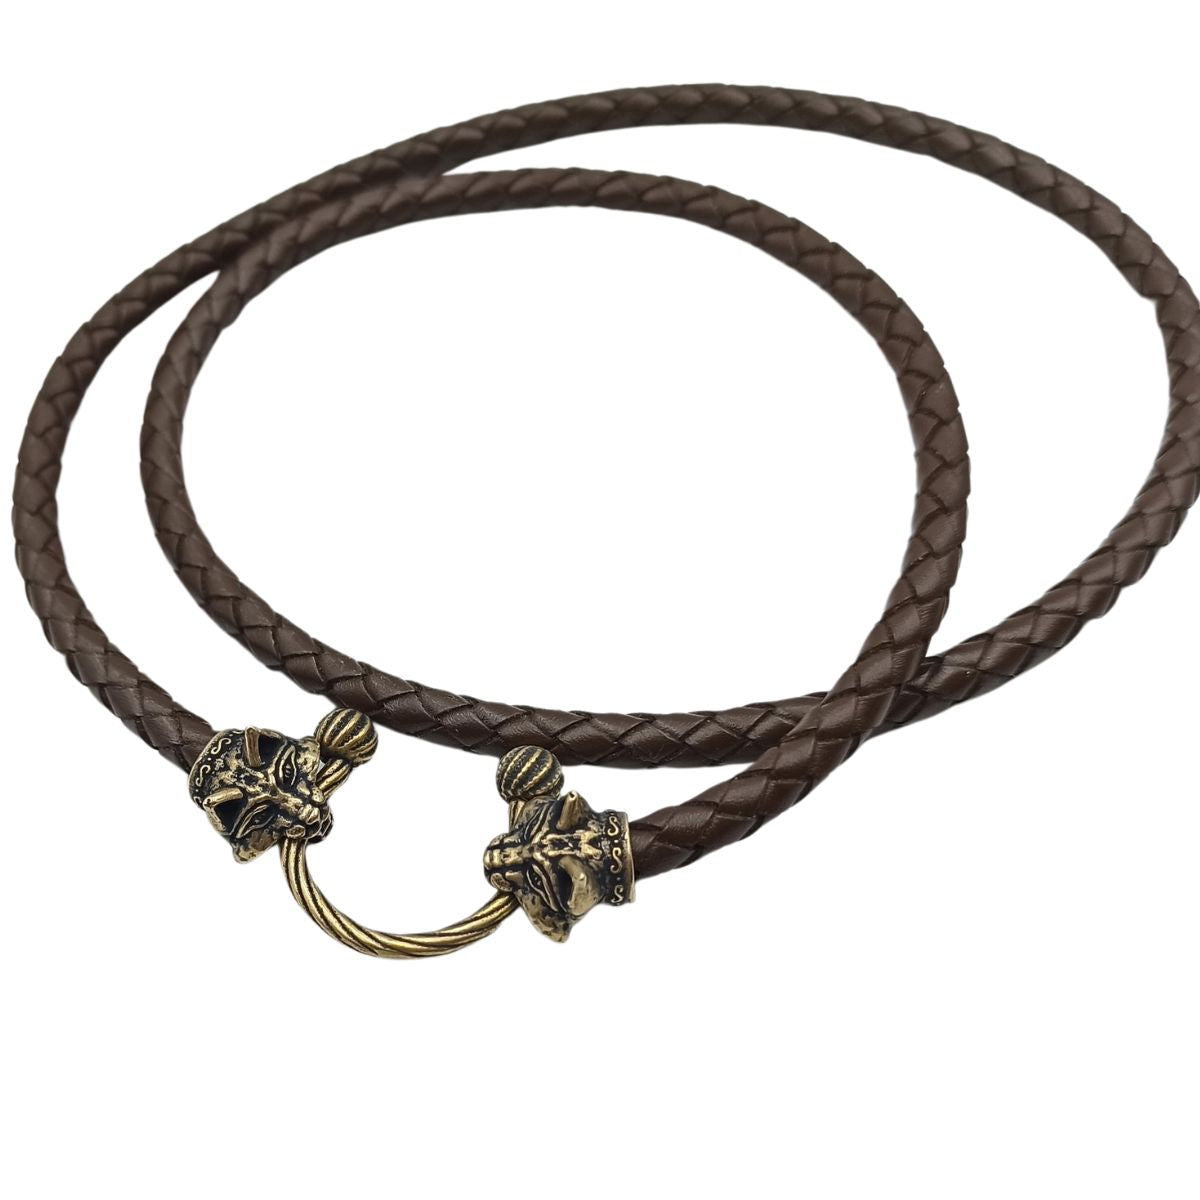 Lynx cat leather necklace   